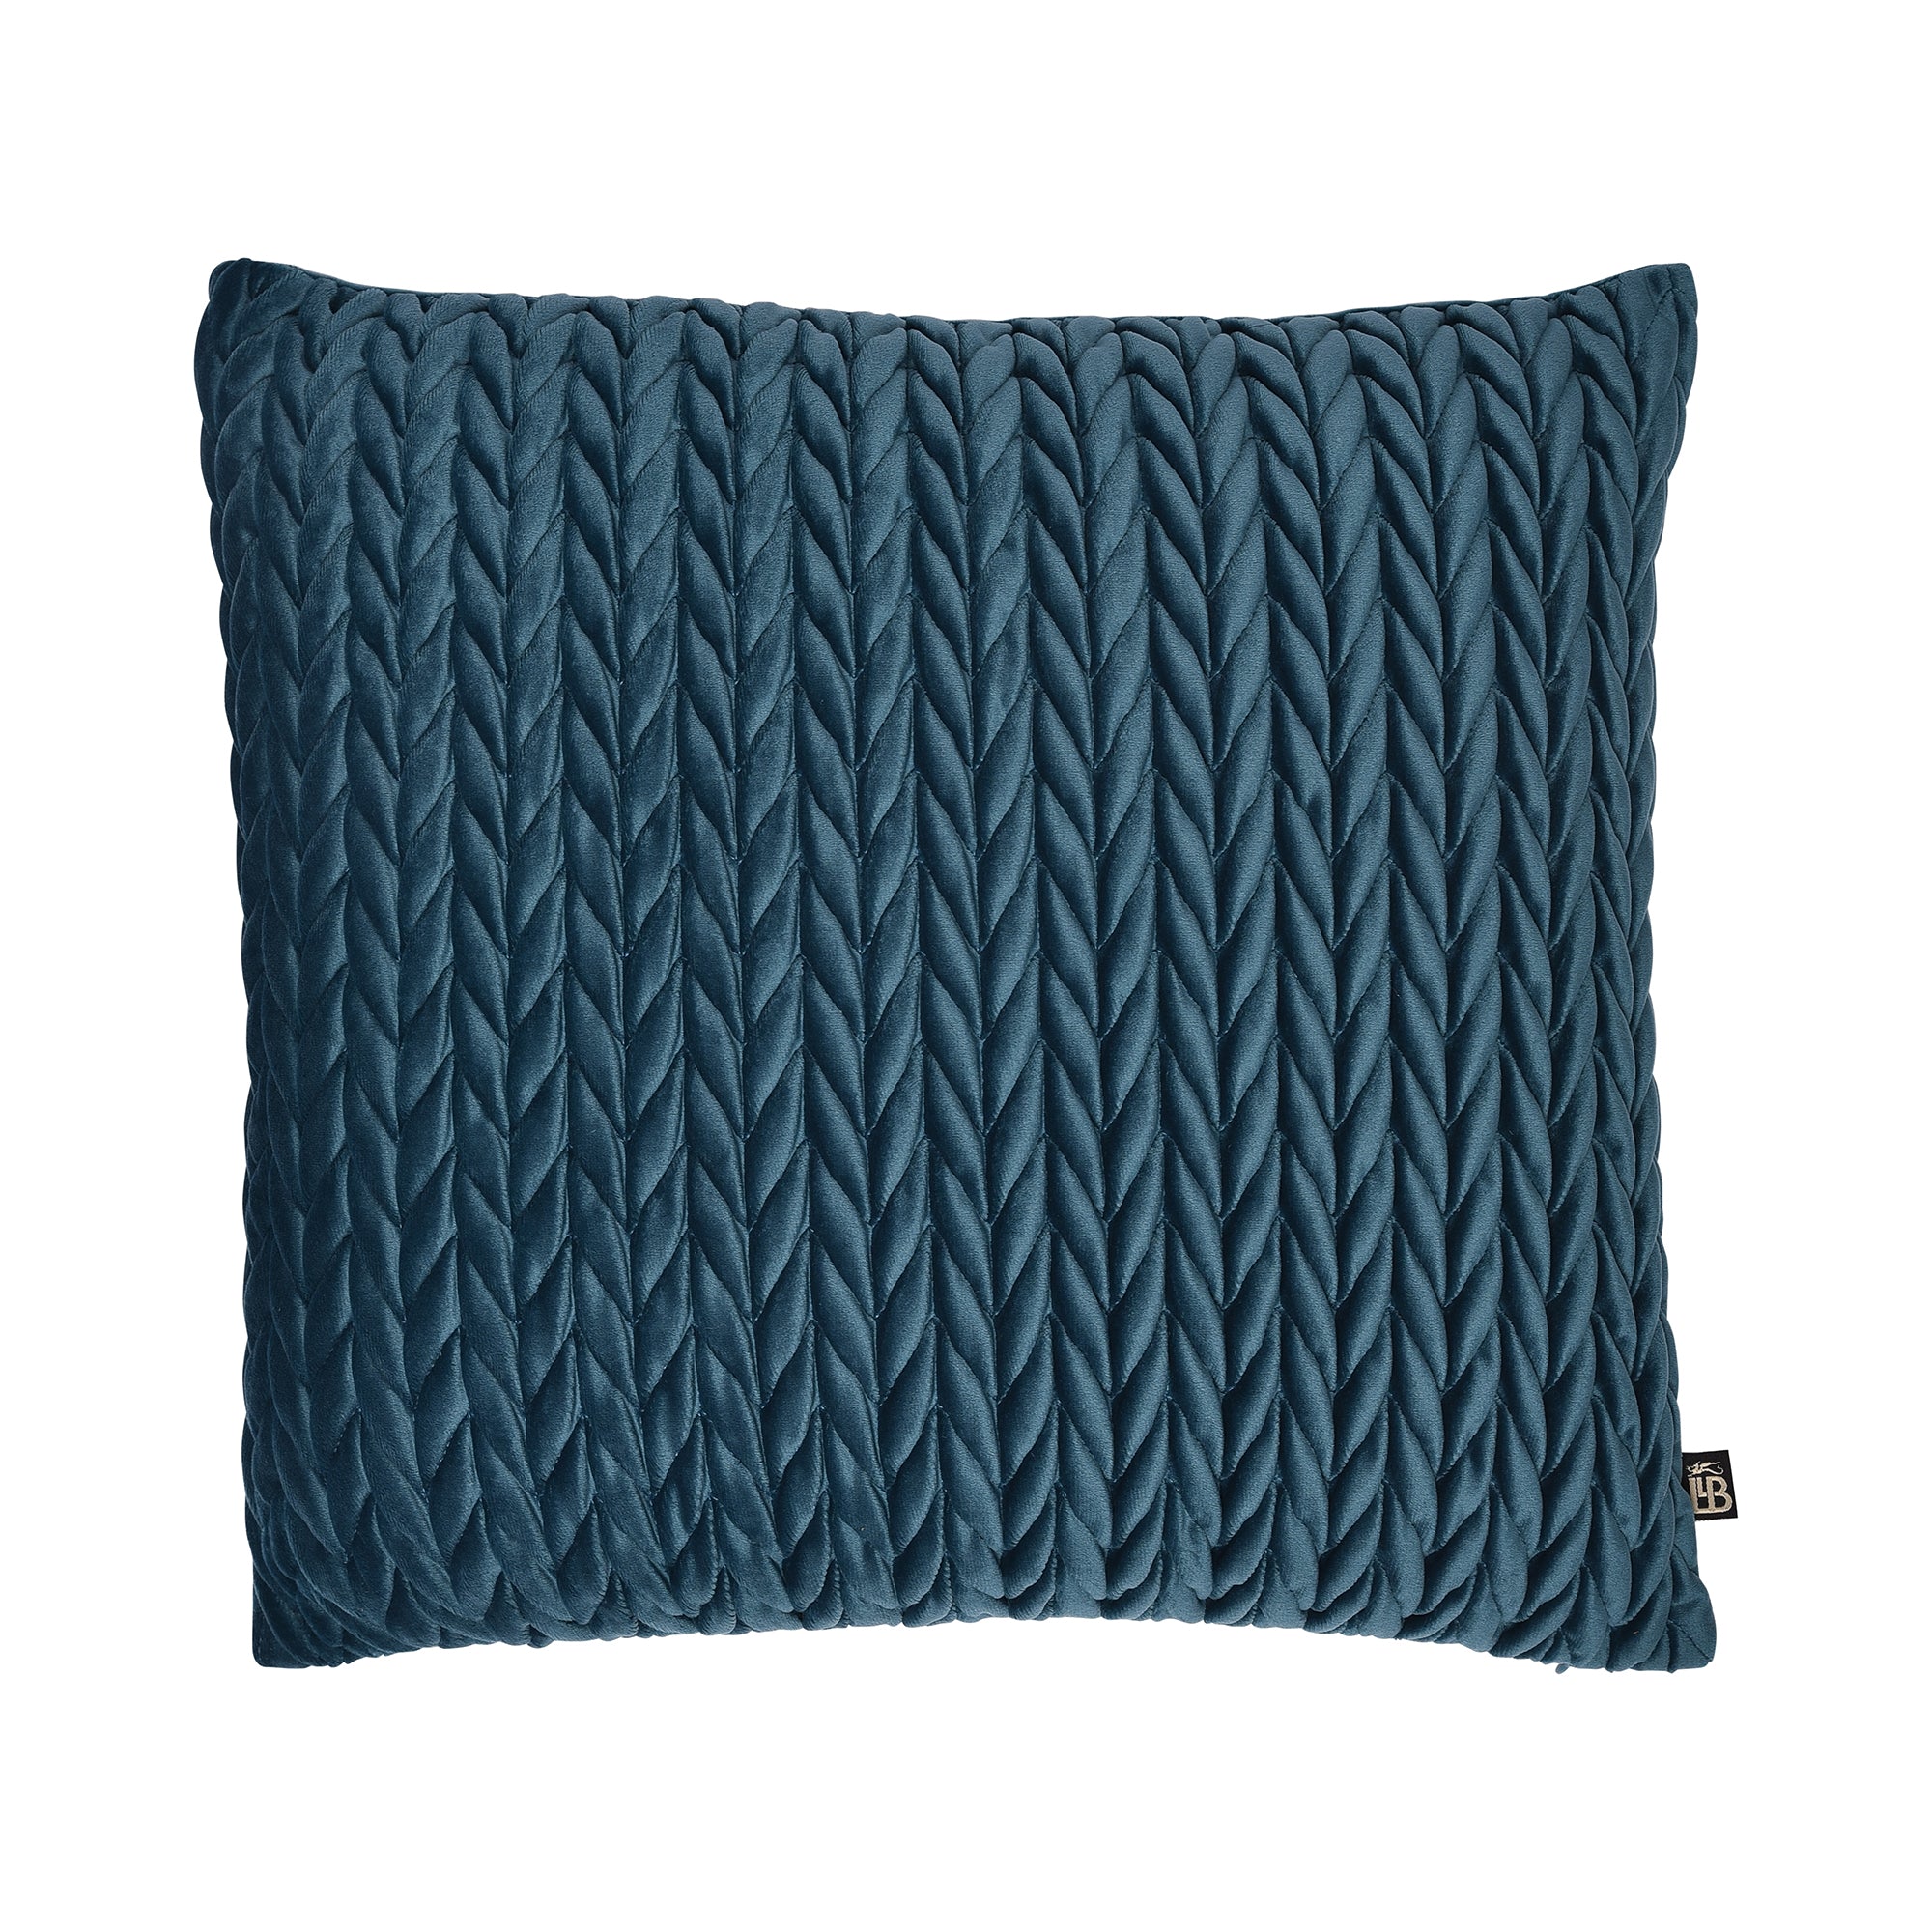 Filled Cushion Amory by Laurence Llewelyn-Bowen in Teal